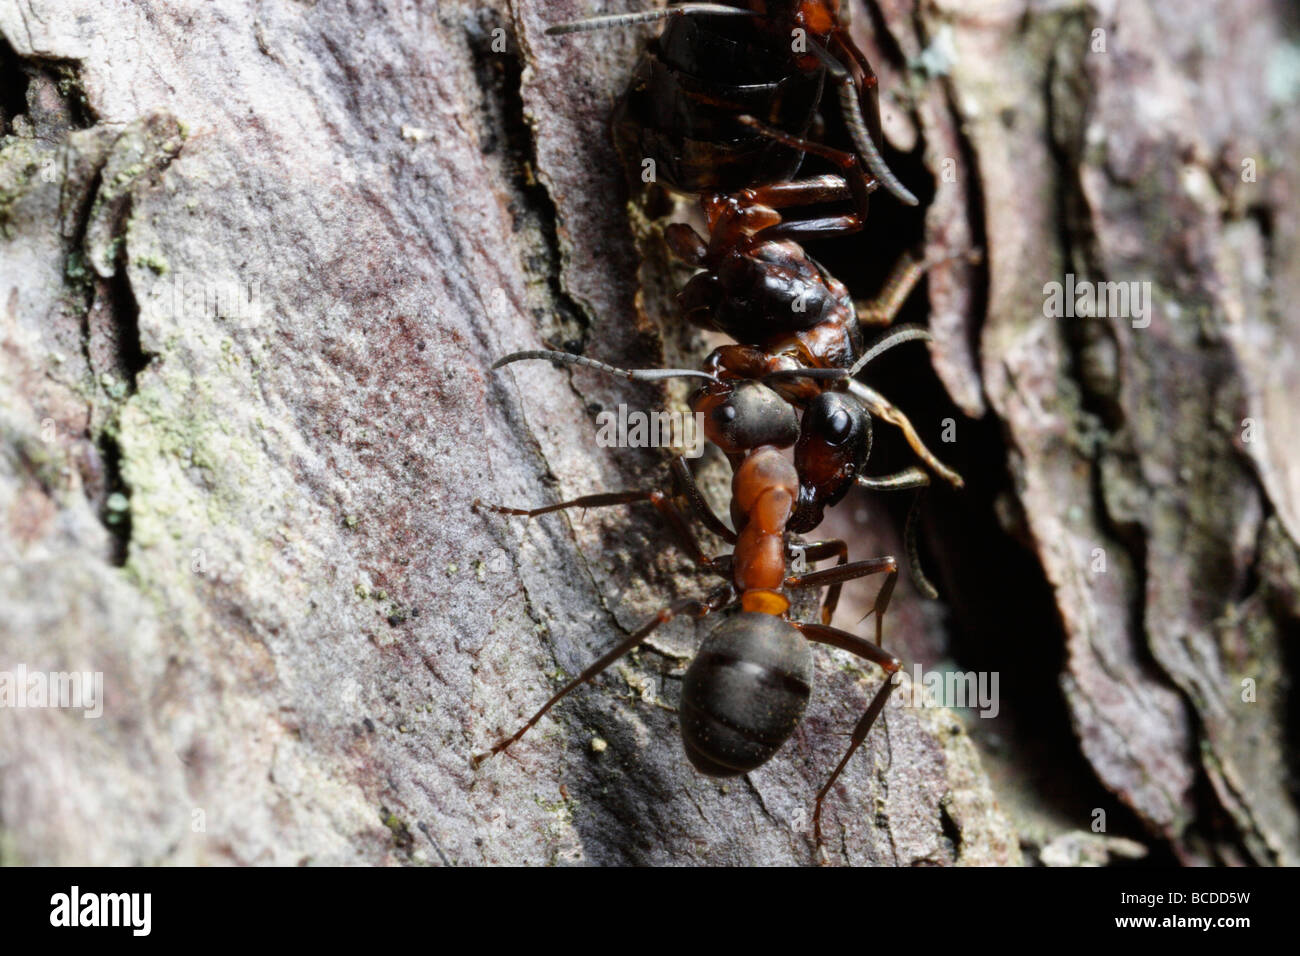 Formica rufa, the southern wood ant or horse ant. Two workers carrying prey. Stock Photo